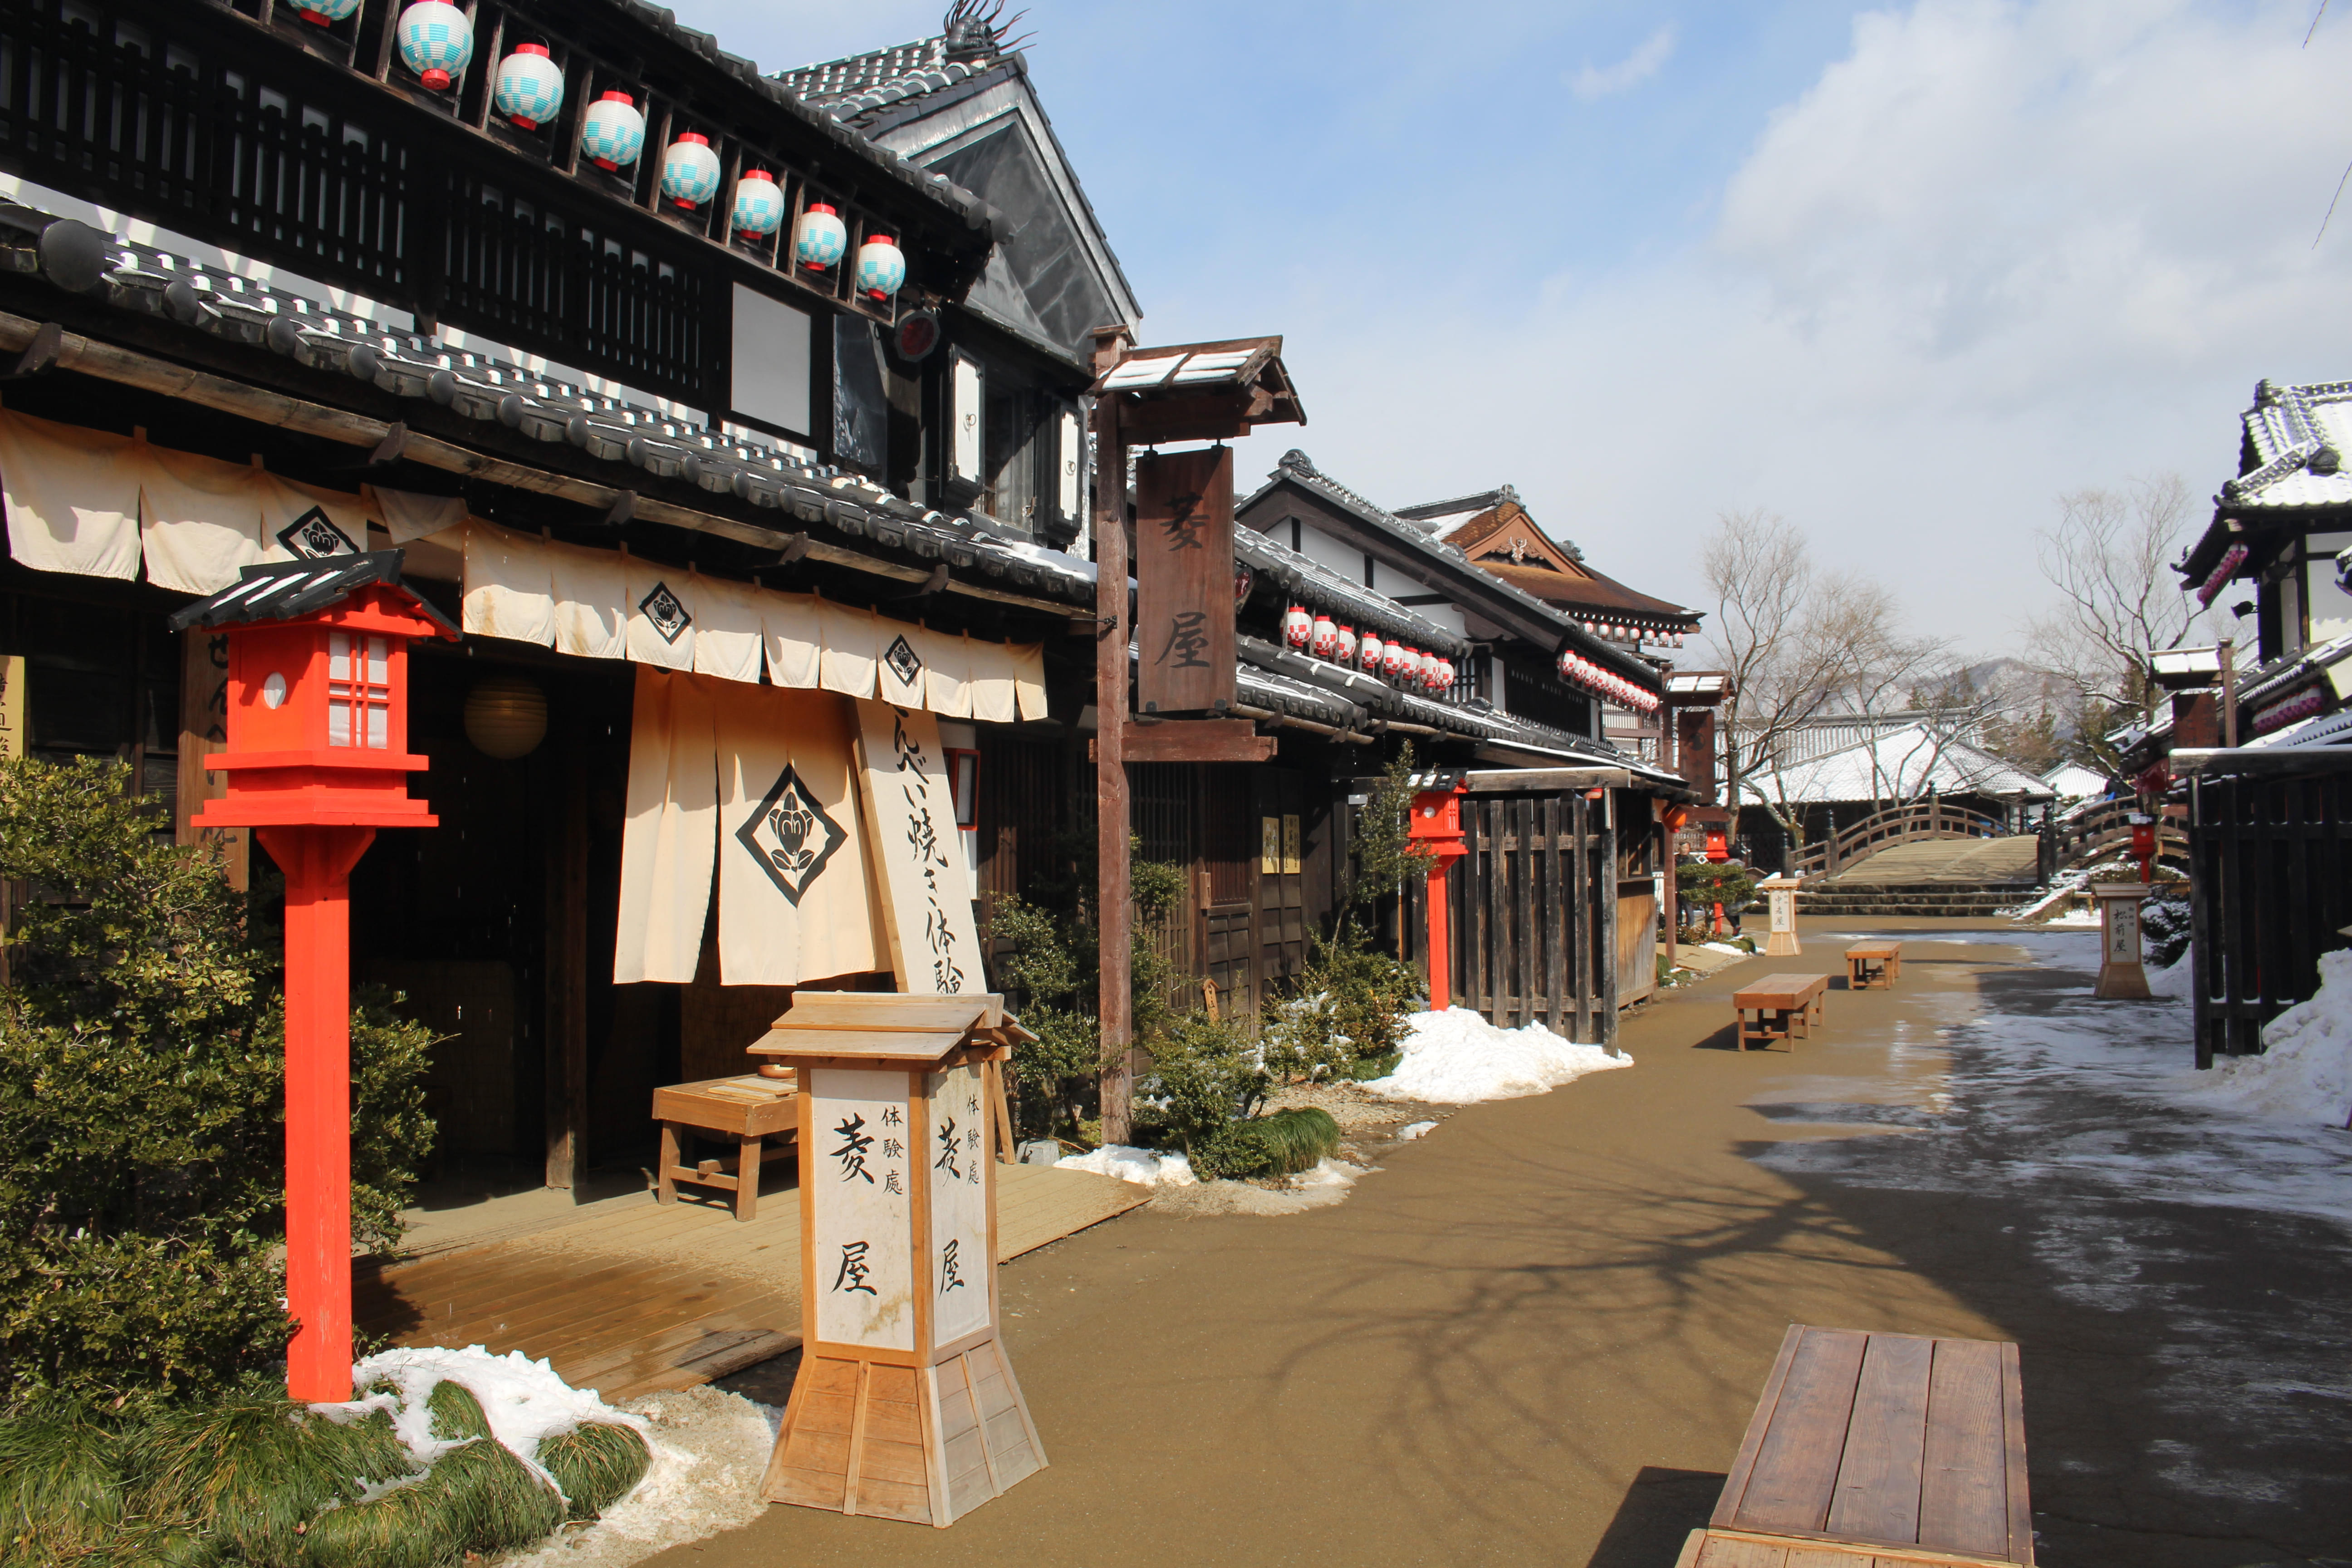  Visit resurrected small town, built in Edo-style architecture